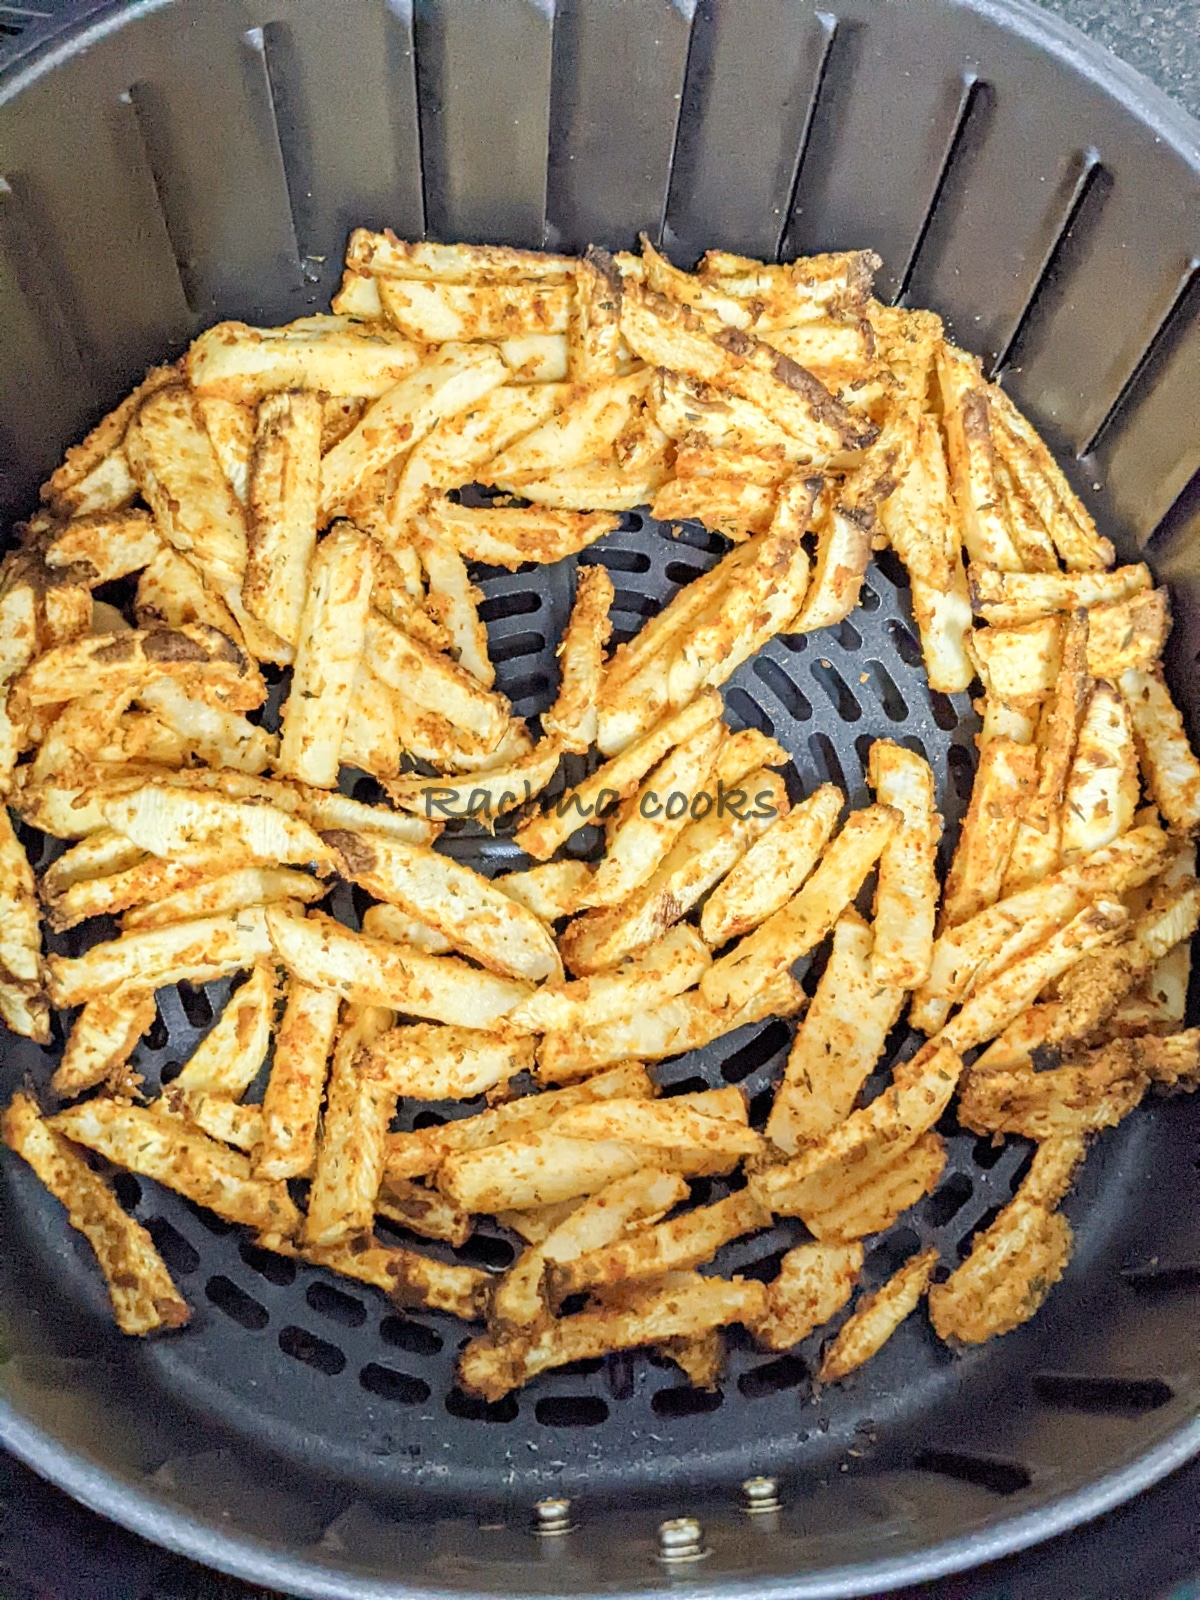 Turnip fries after air frying in the air fryer basket.